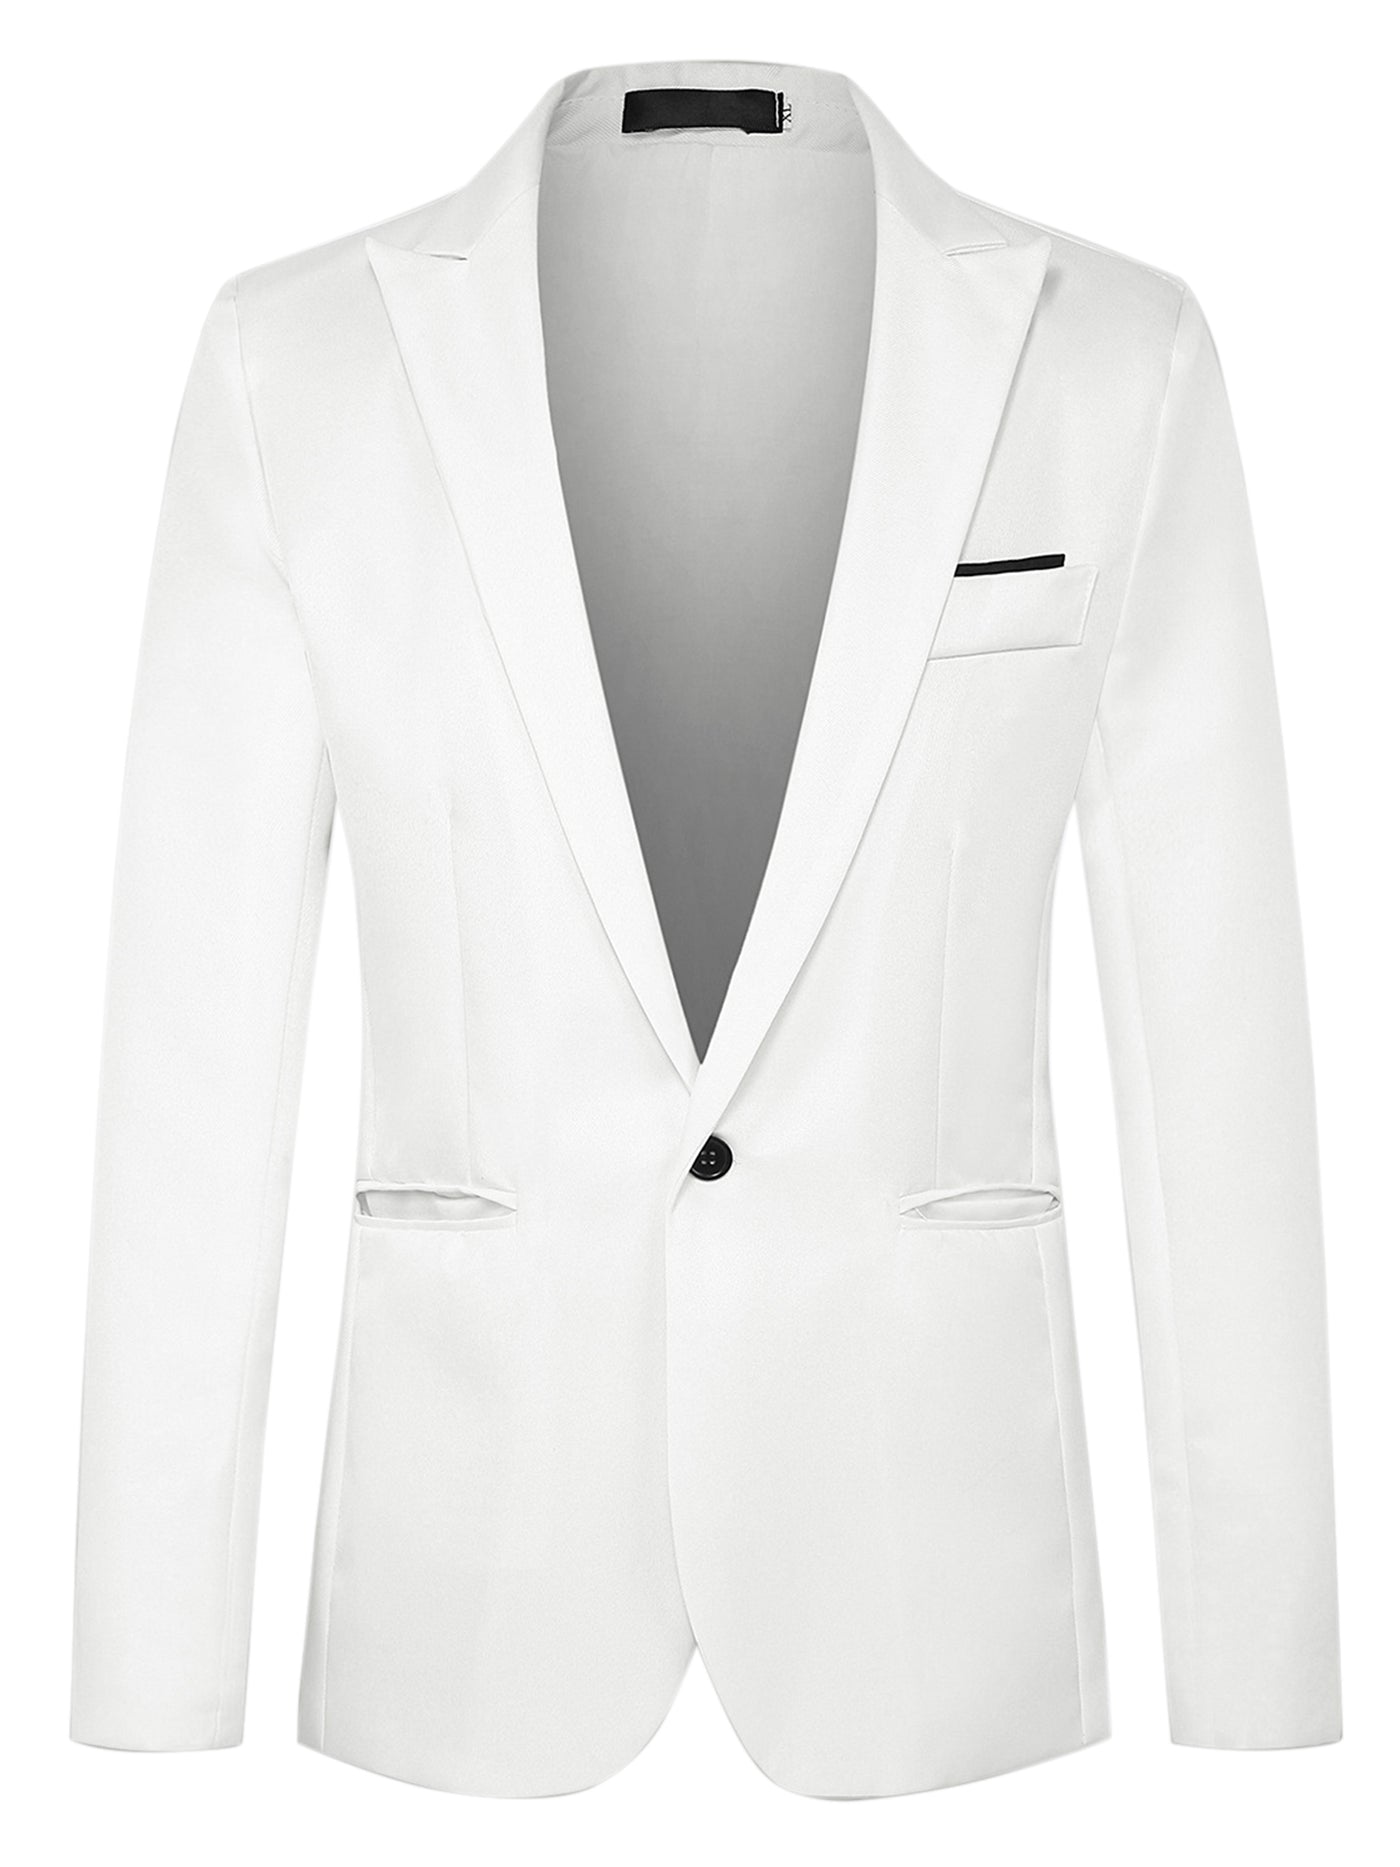 Bublédon Single Breasted One Button Dress Suit Formal Blazer